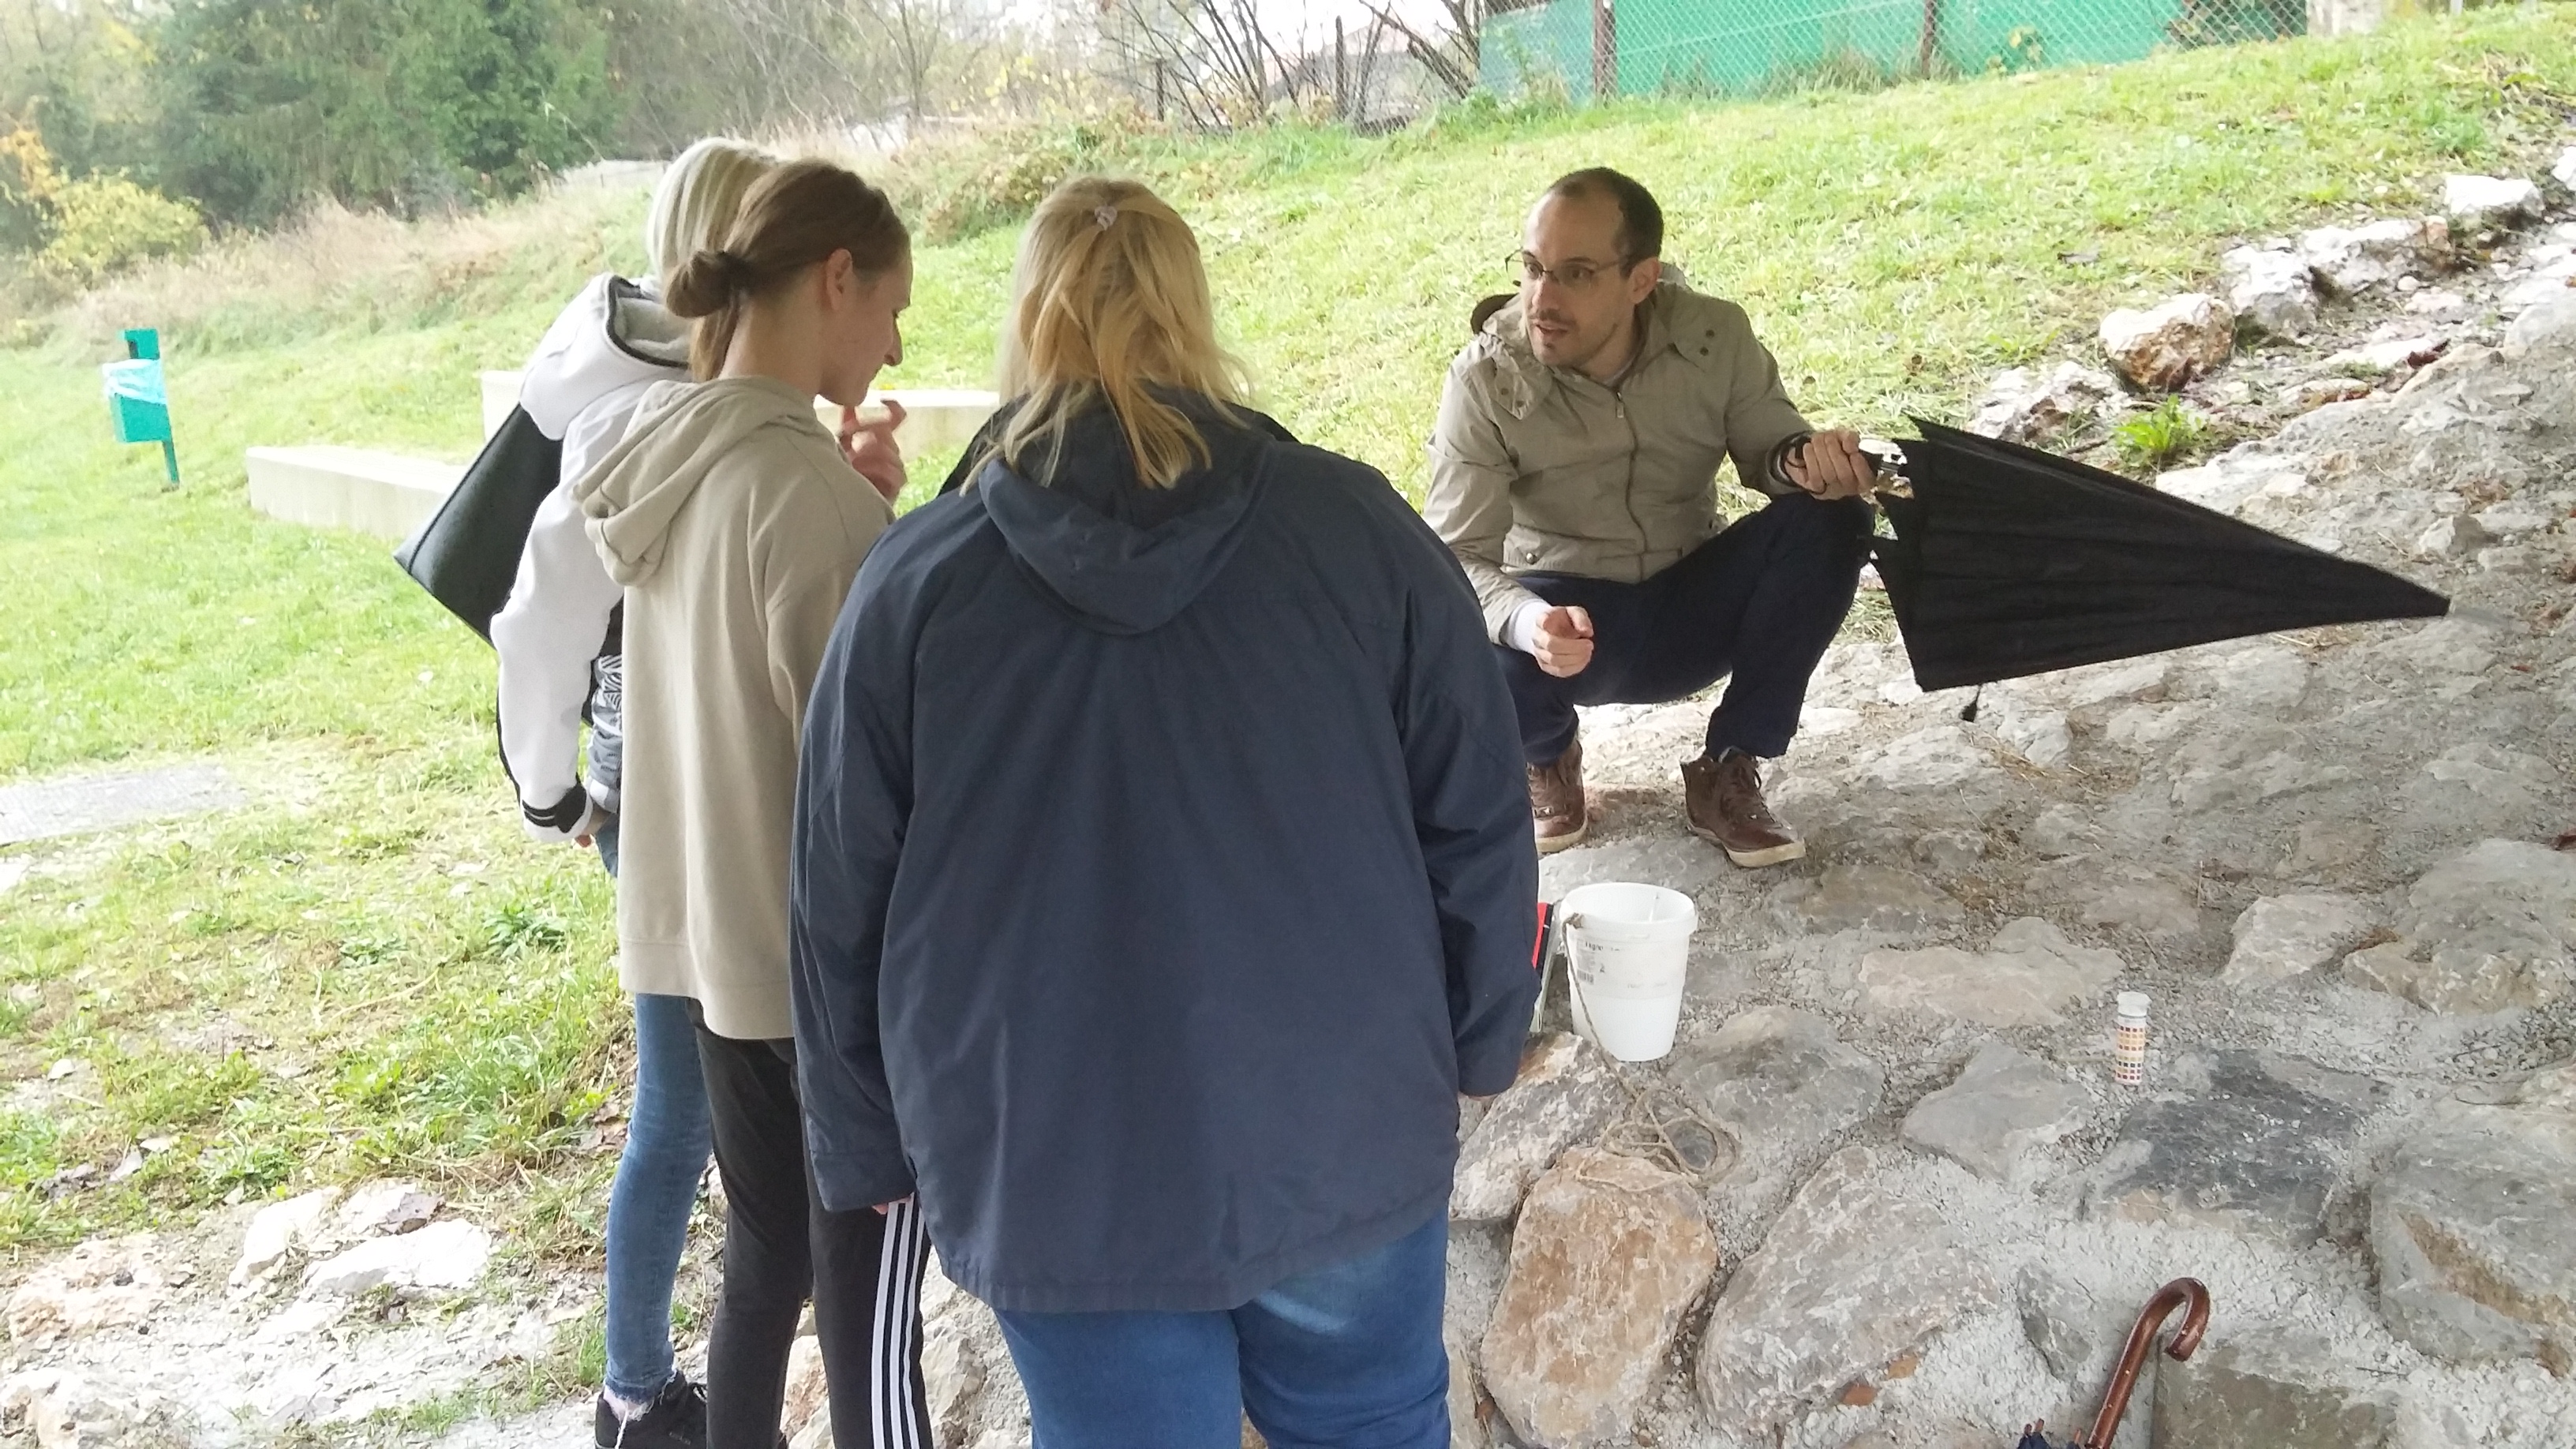 The GLOBE Country Coordinator of Slovenia discusses how students are taking water quality measurements of their local river next to Domžale secondary school, Slovenia.